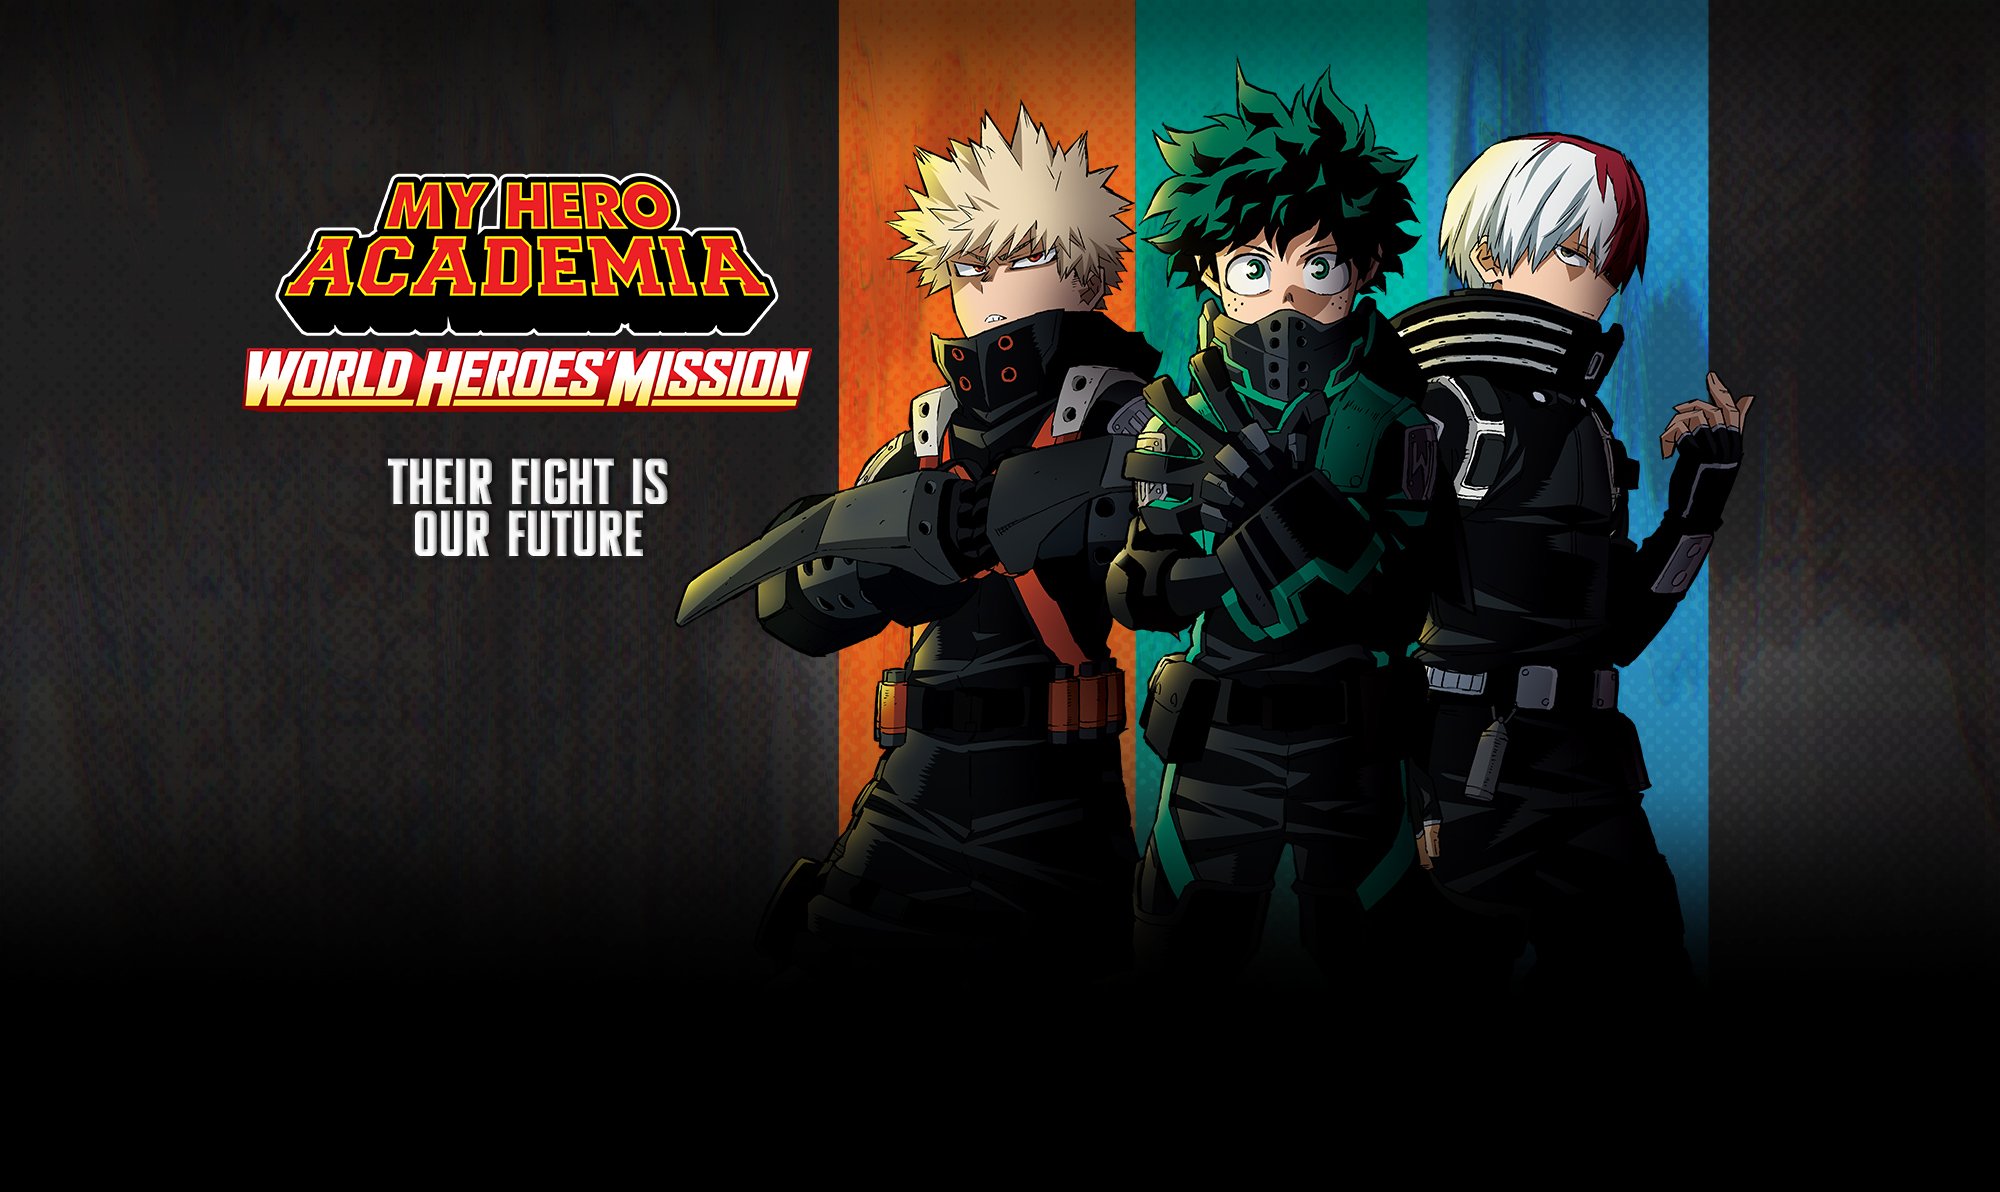 My Hero Academia: World Heroes' Mission, Funimation Films